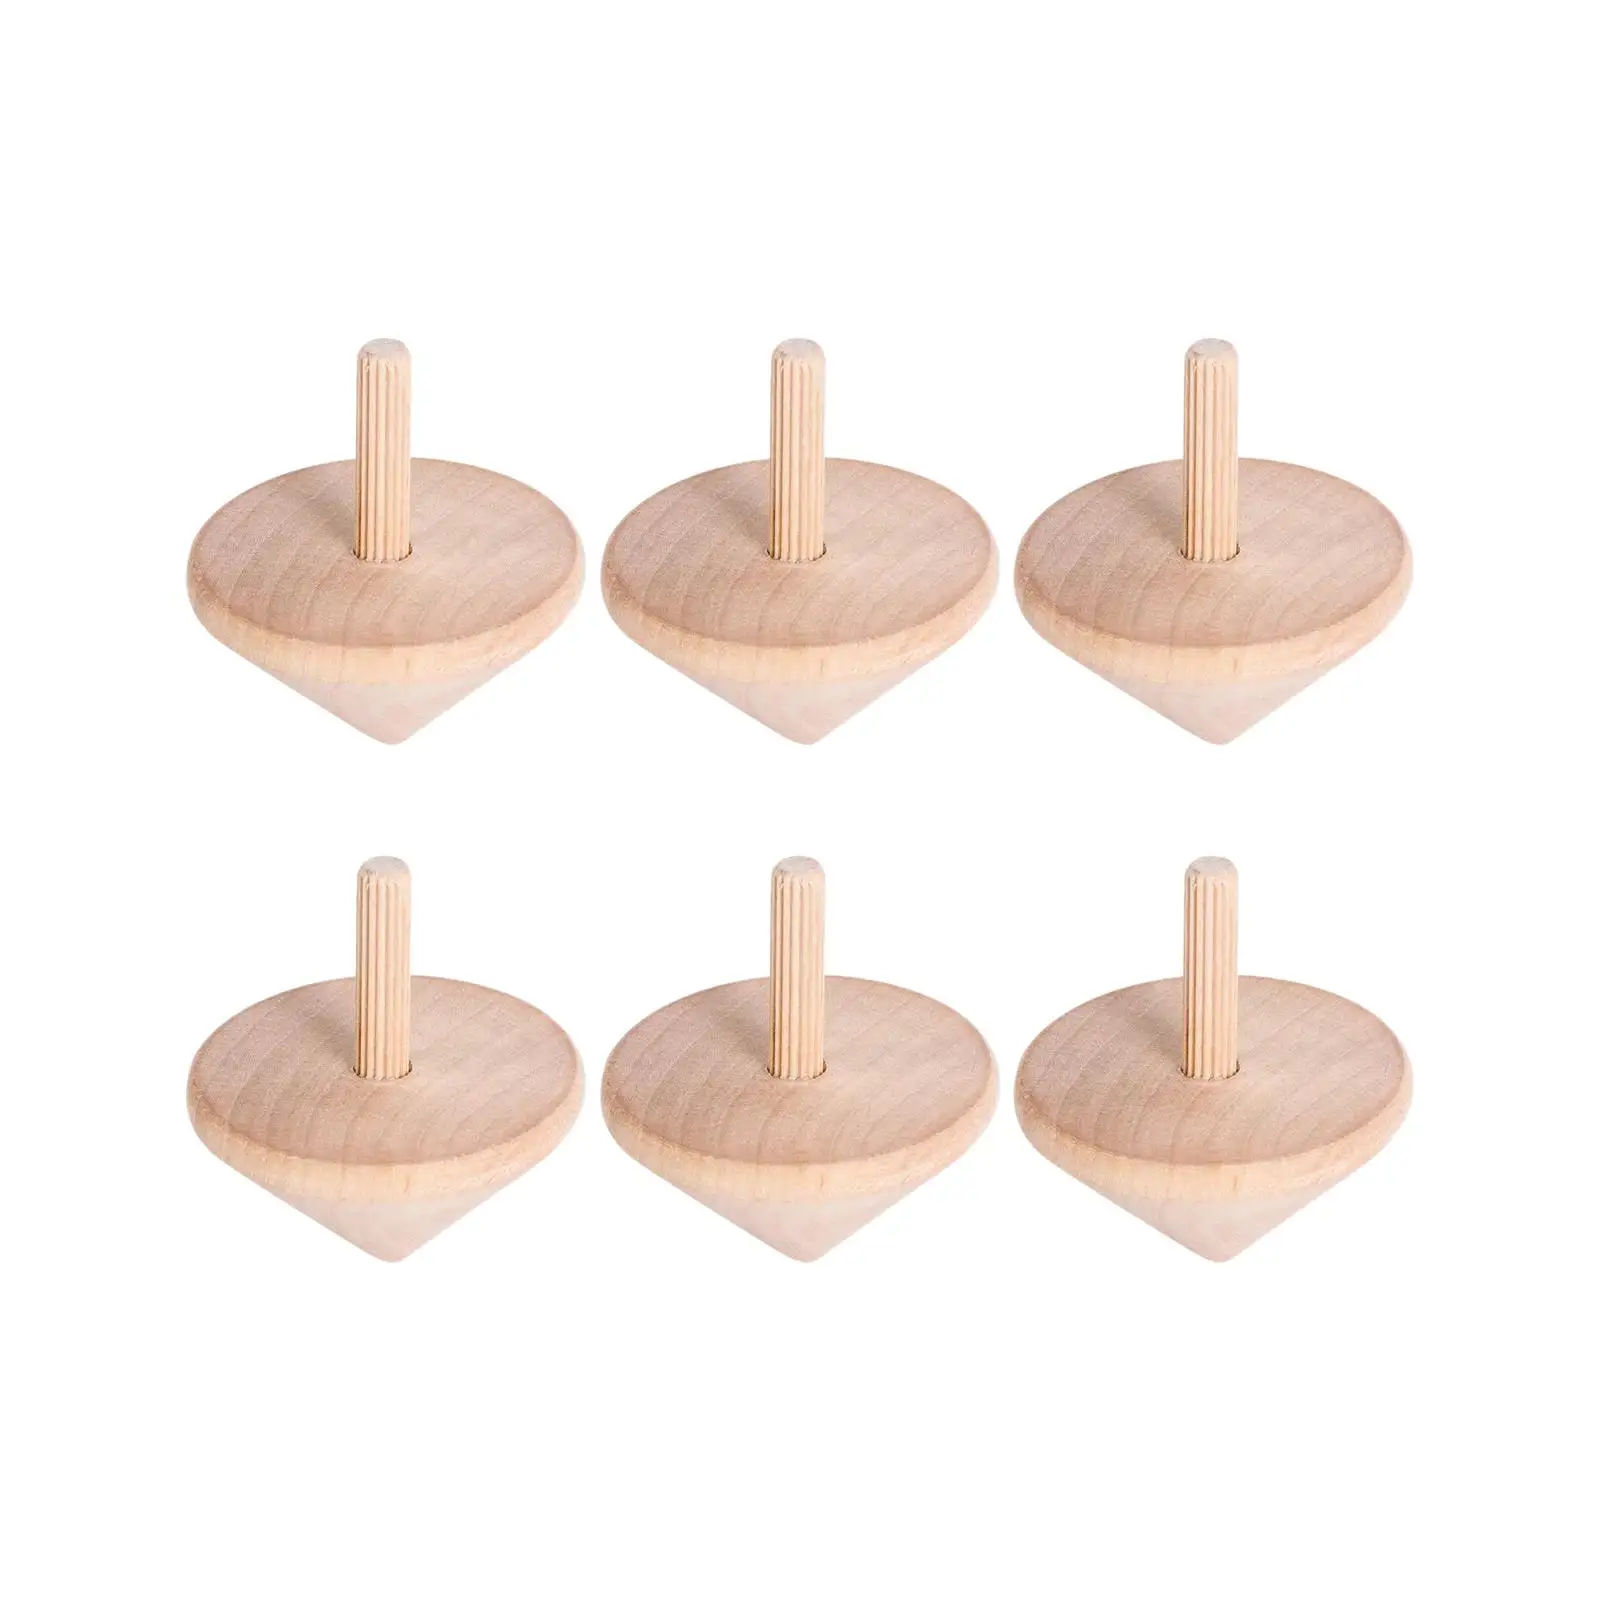 6Pcs Unpainted Wood Tops Traditional Nostalgic Toys for Toddlers Gift